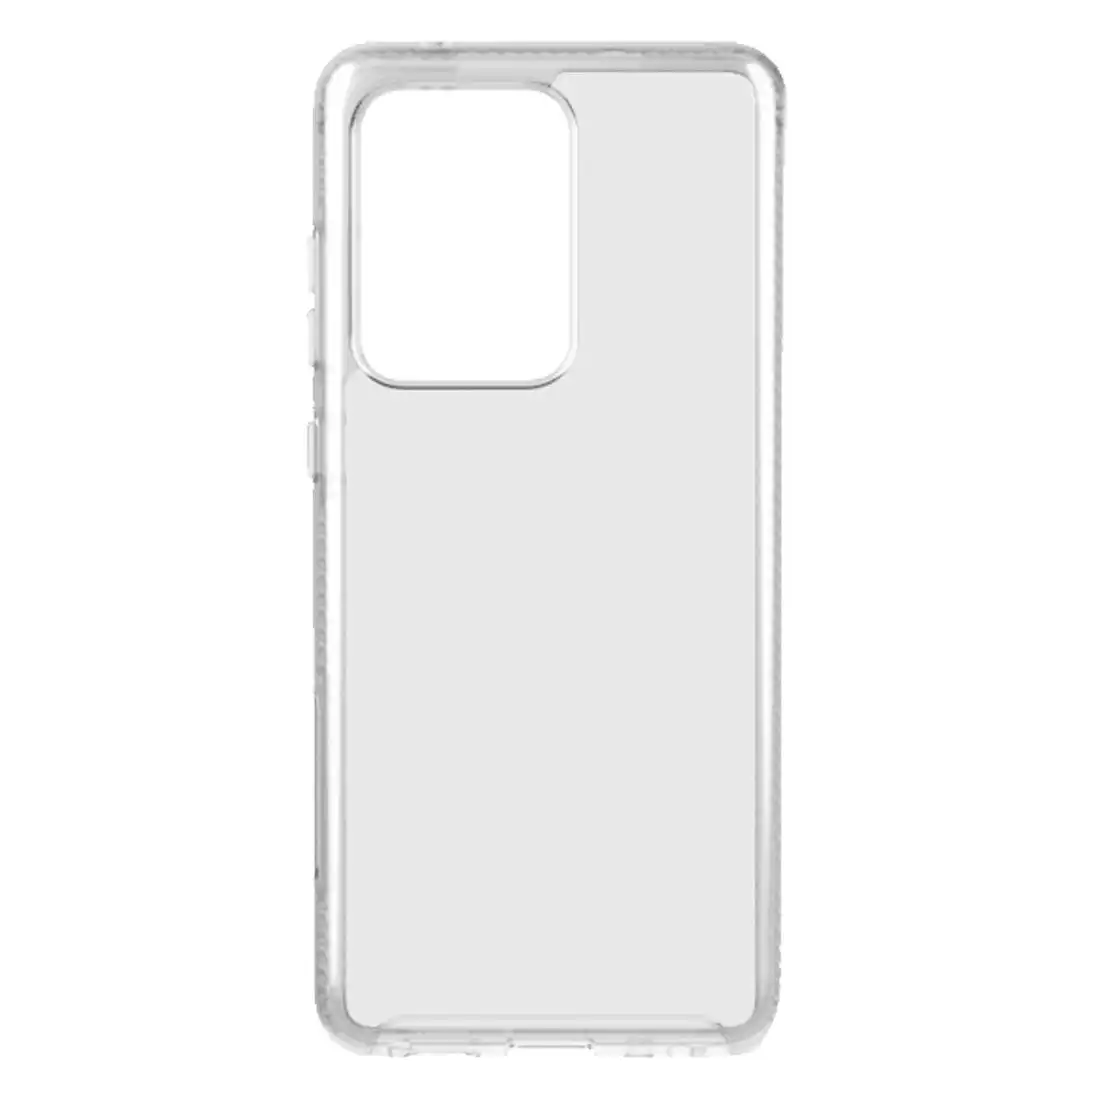 Tech21 Pure Clear Case for Samsung Galaxy S20 Ultra T21-7704 - Clear